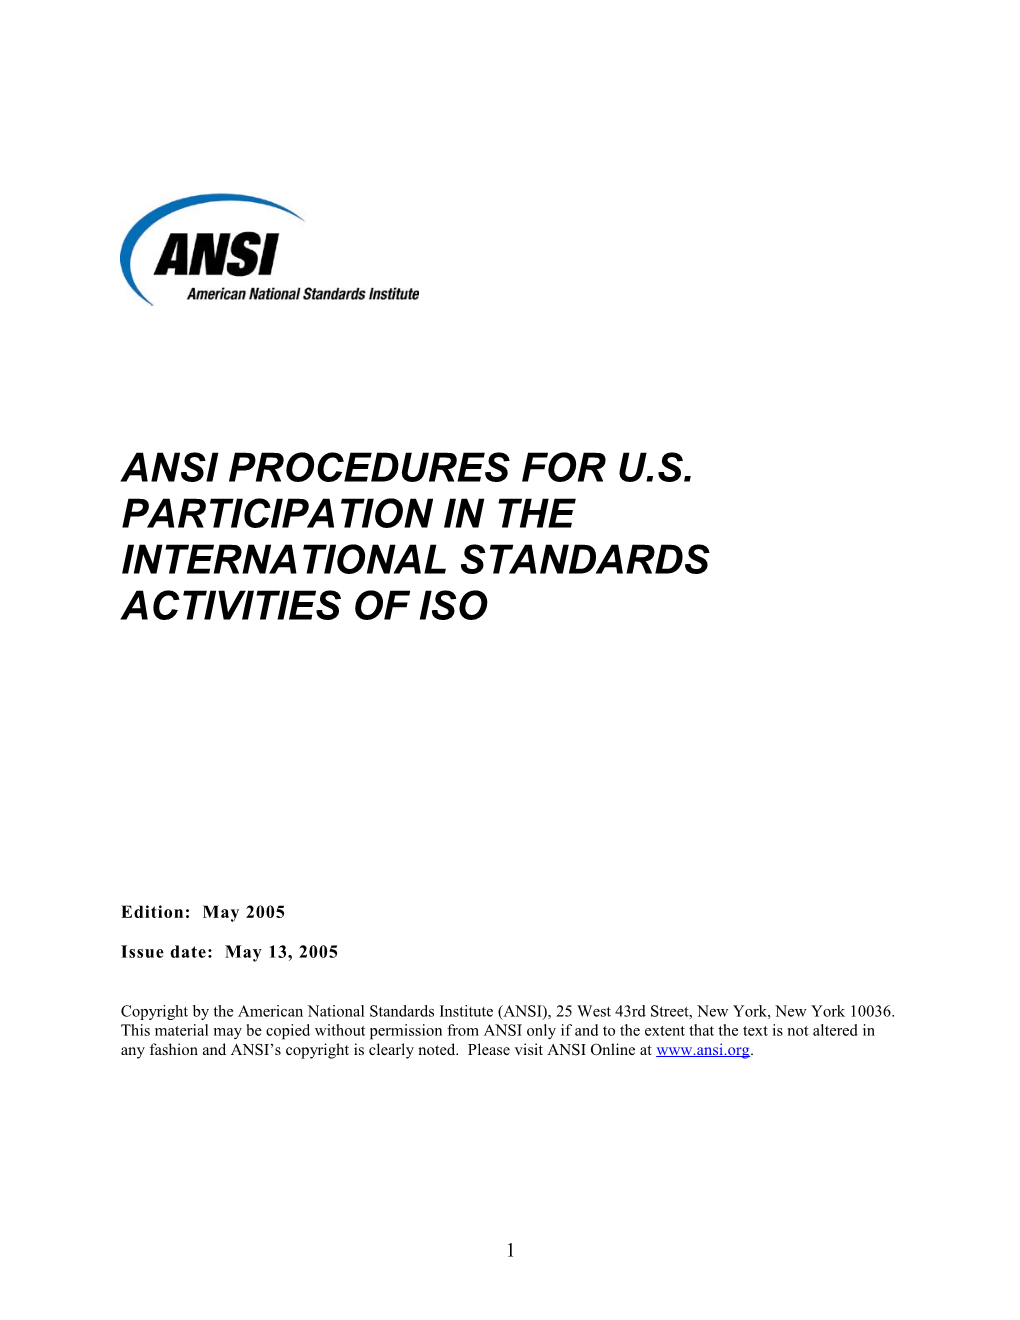 ANSI Procedures for U.S. Participation in the International Standards Activities of ISO